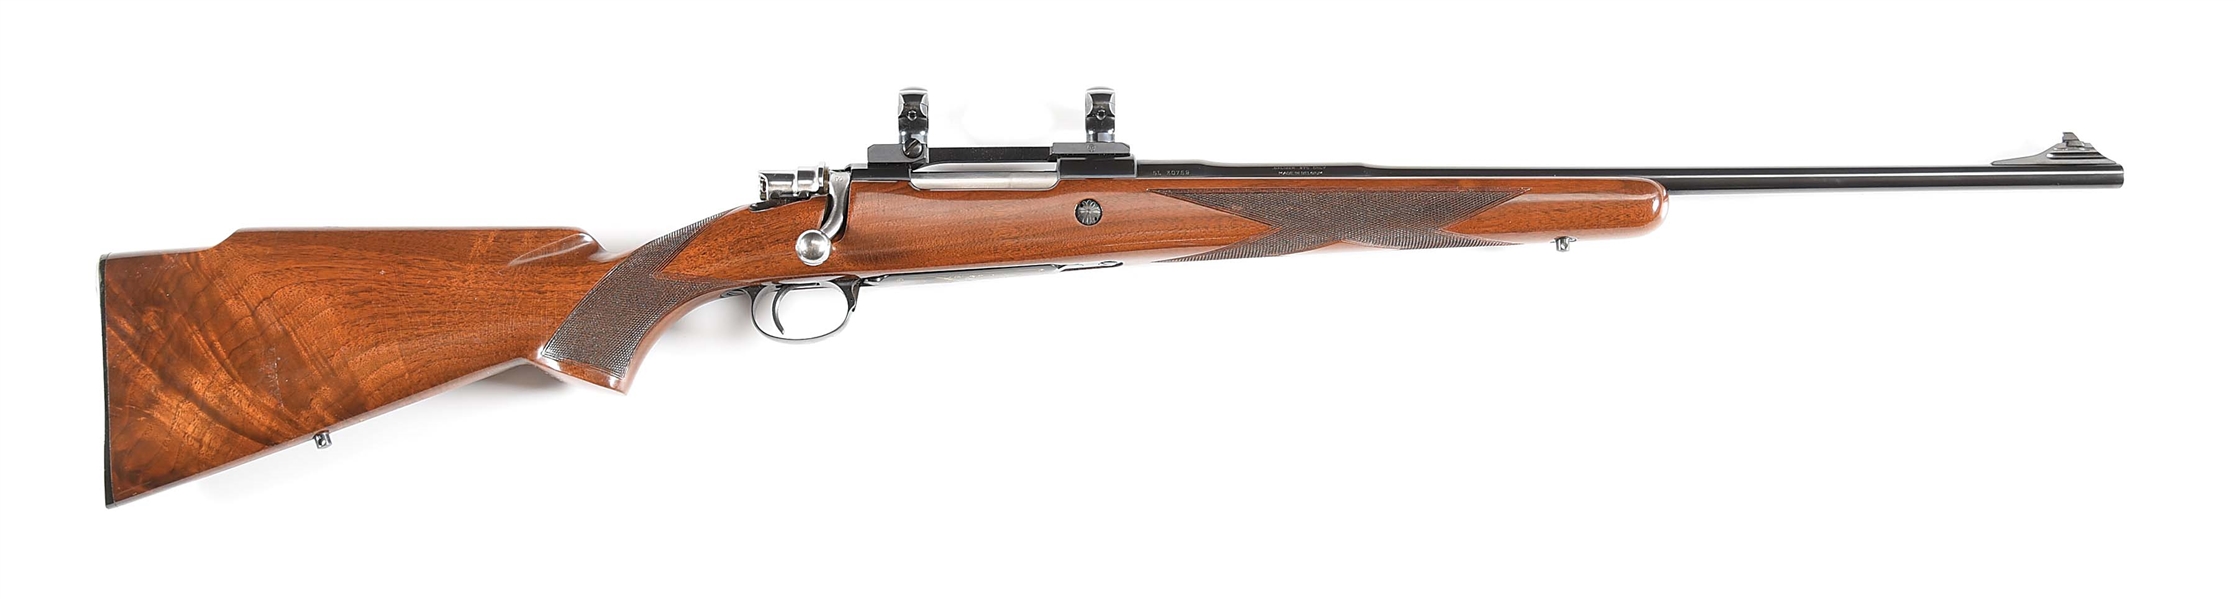 (M) BROWNING HIGH POWER BOLT ACTION RIFLE IN .270 WINCHESTER.